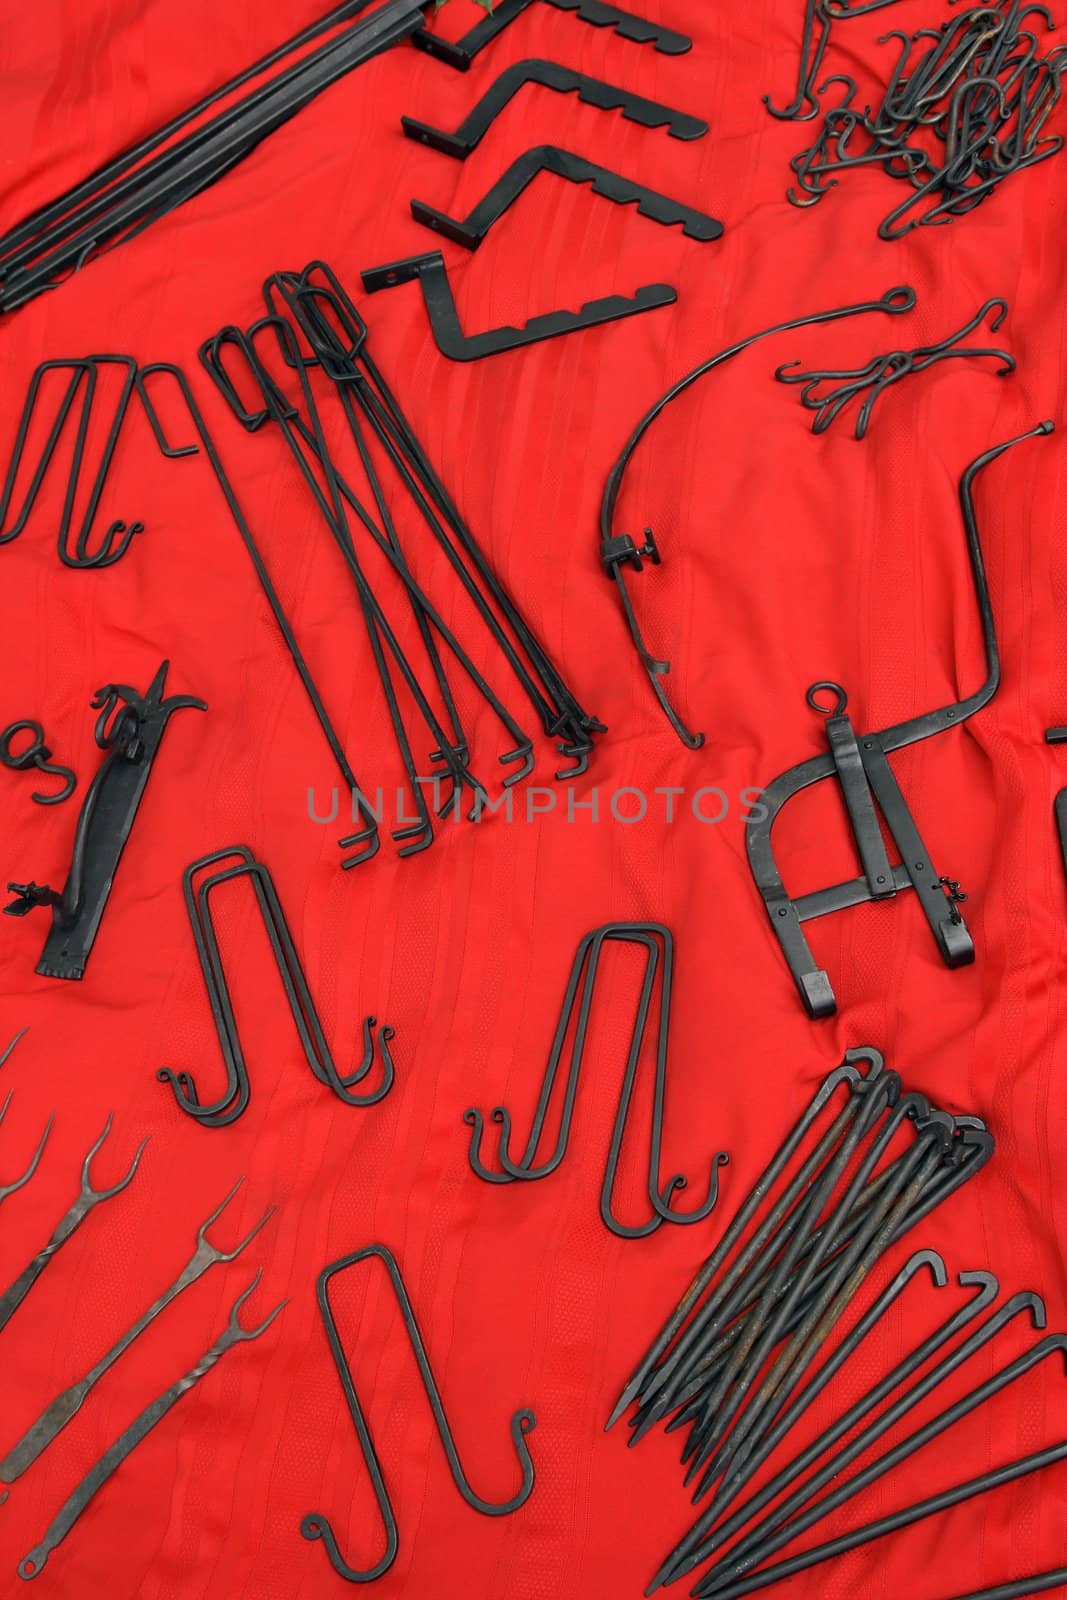 Old-fashioned wrought iron tools on red background.